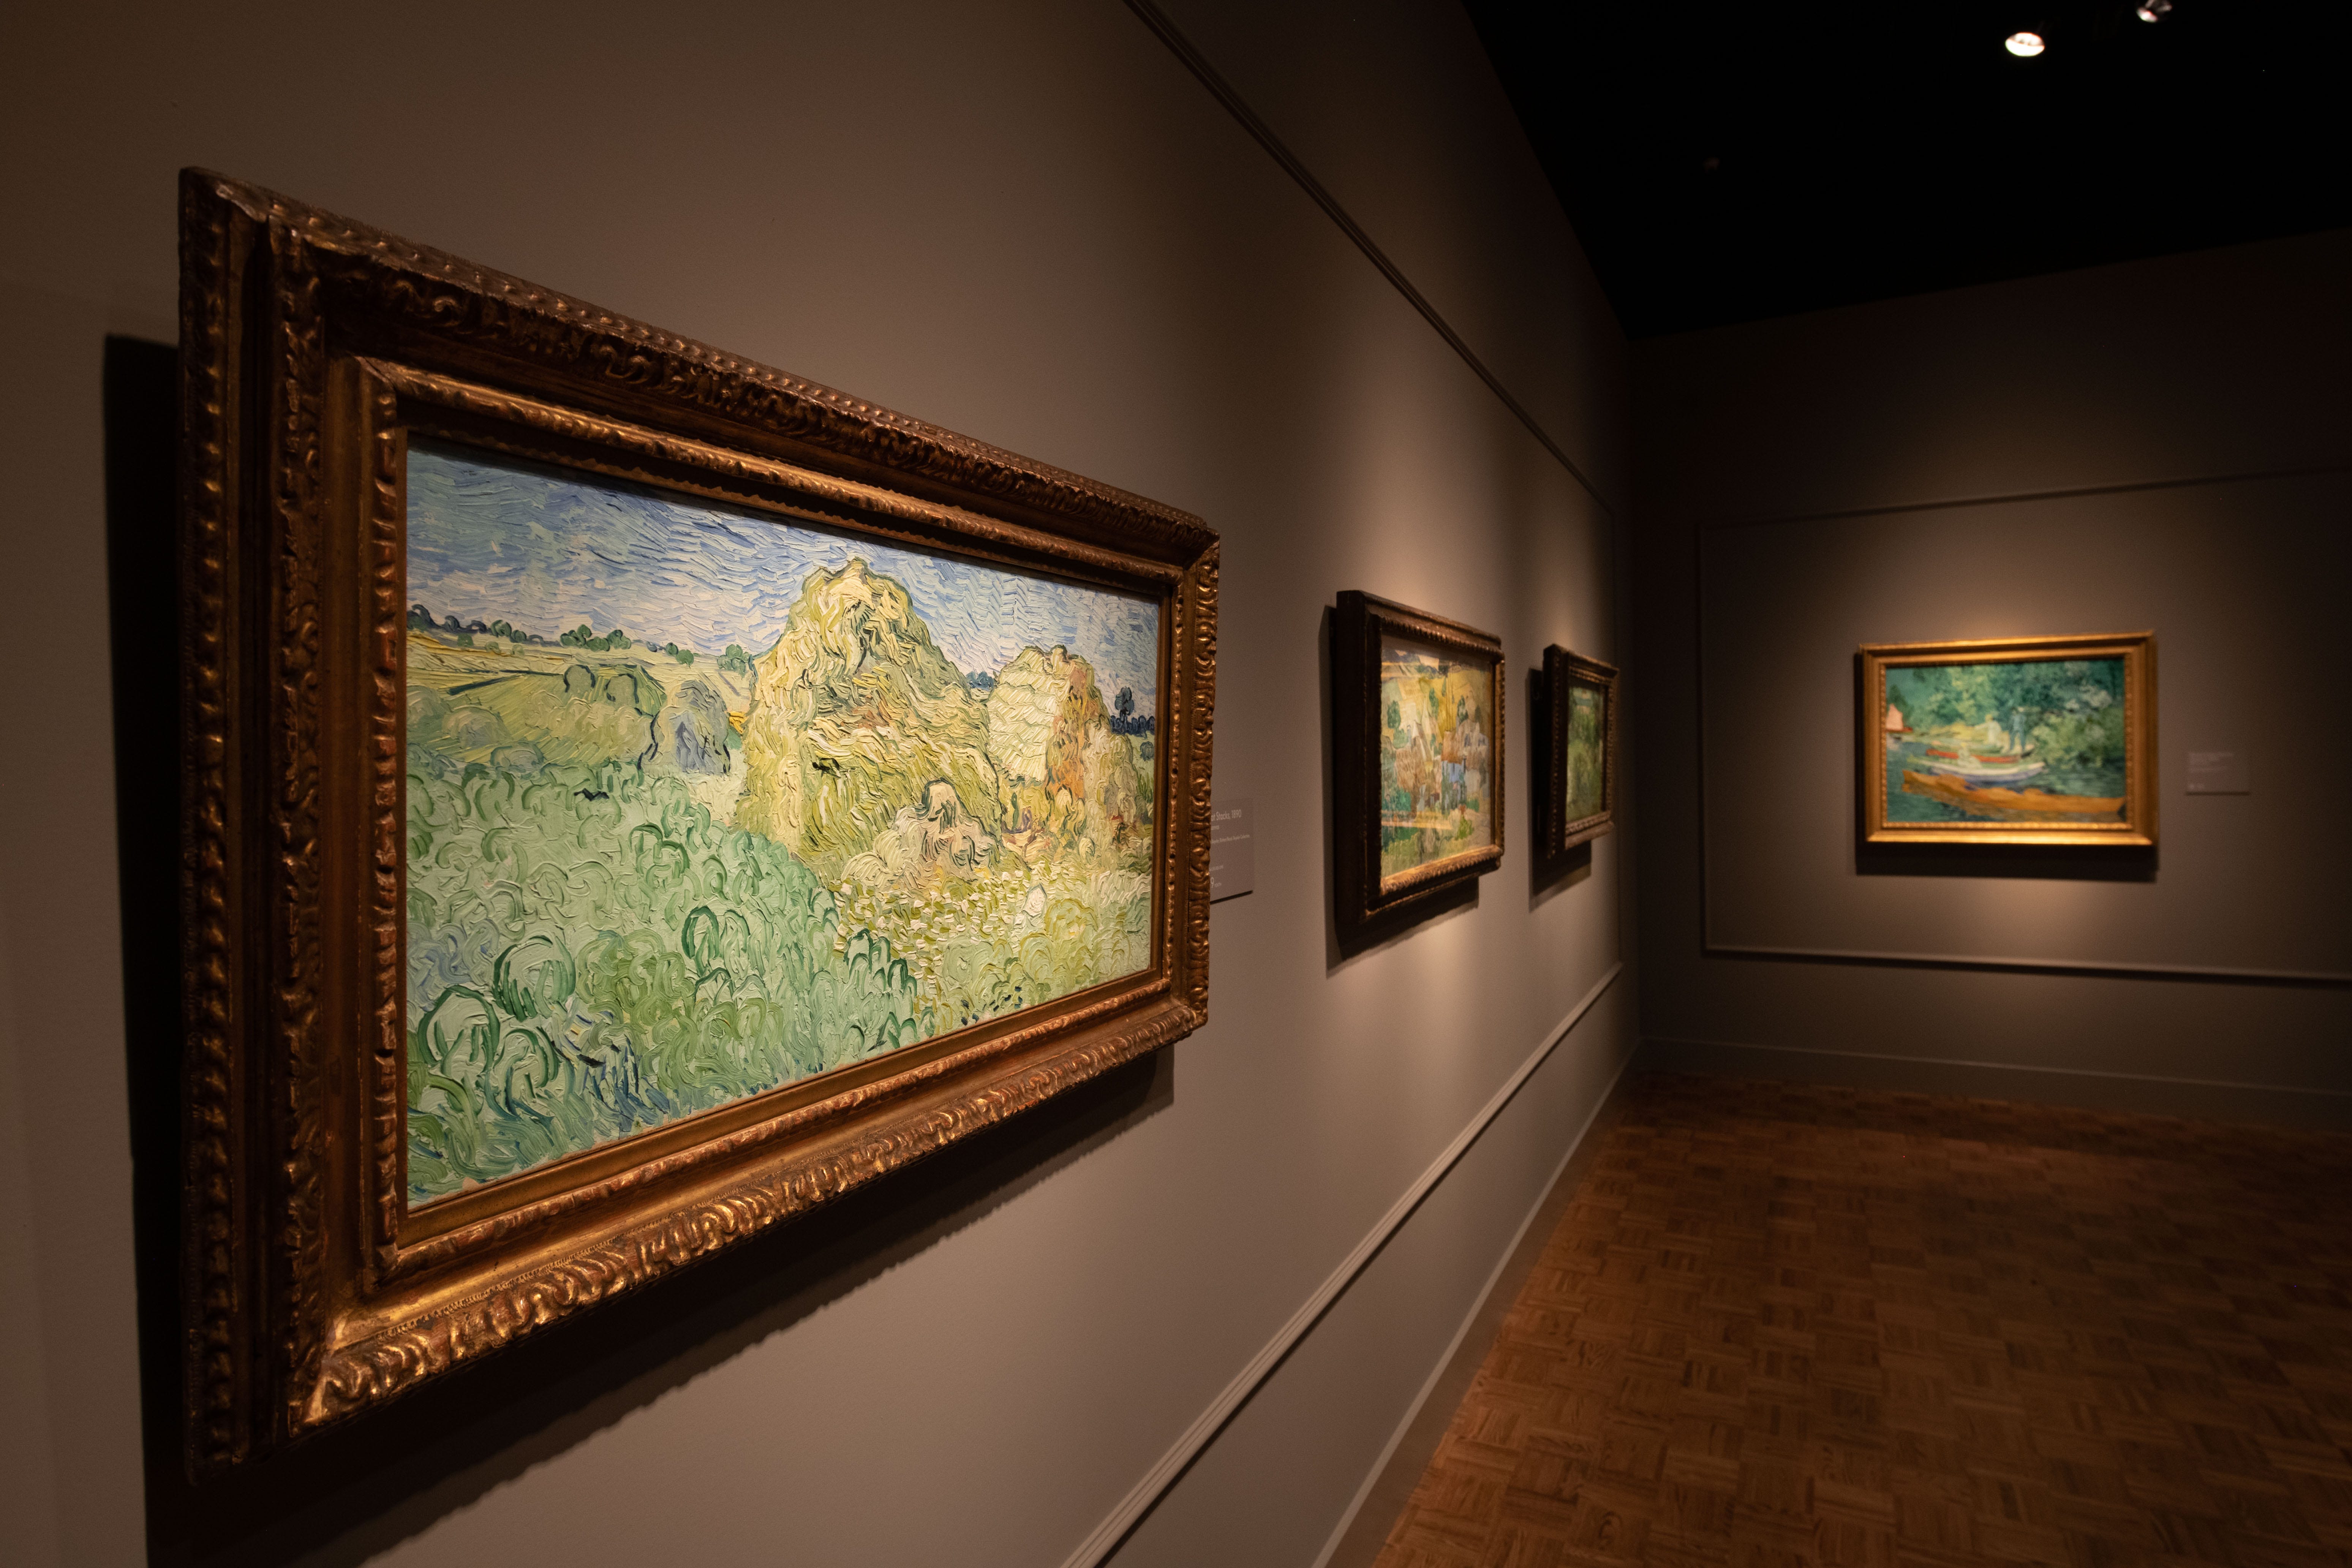 Wheat Stacks, painted in 1890, on display at the Van Gogh in America exhibit, at the Detroit Institute of Arts, in Detroit, September 27, 2022.